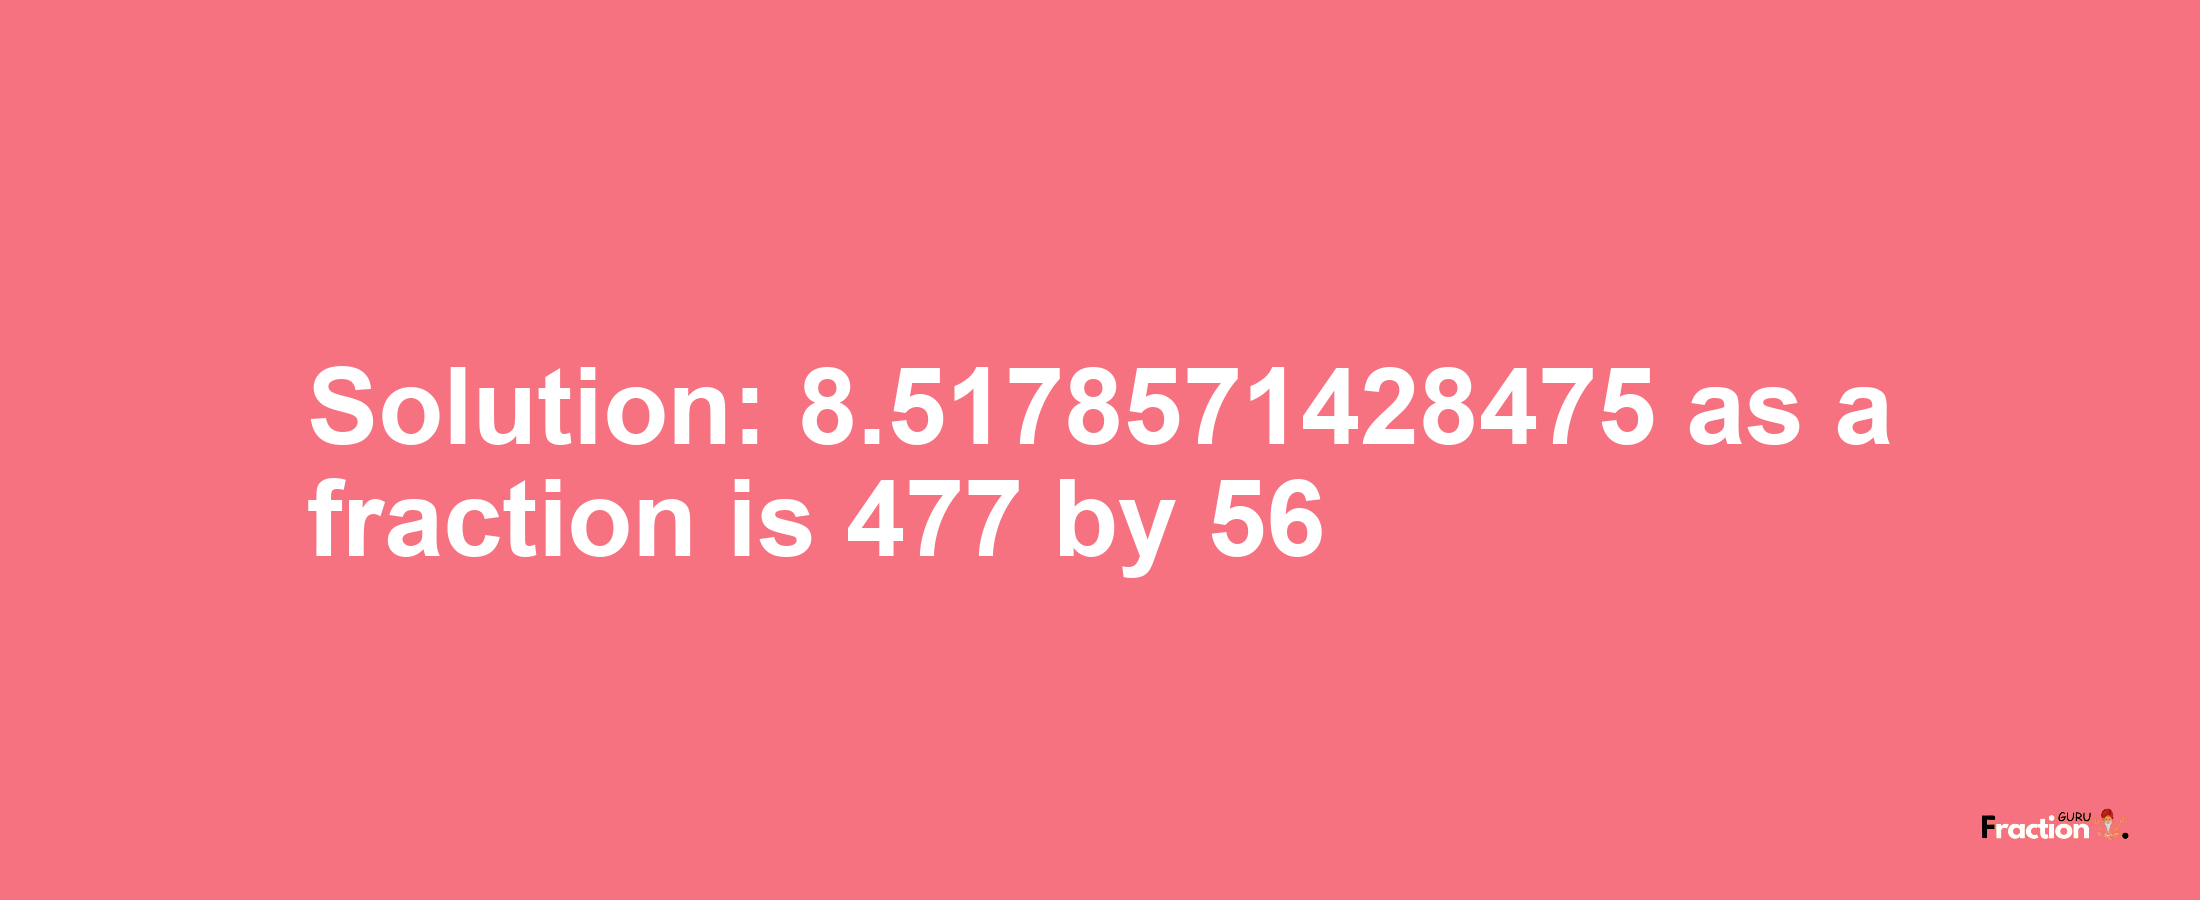 Solution:8.5178571428475 as a fraction is 477/56